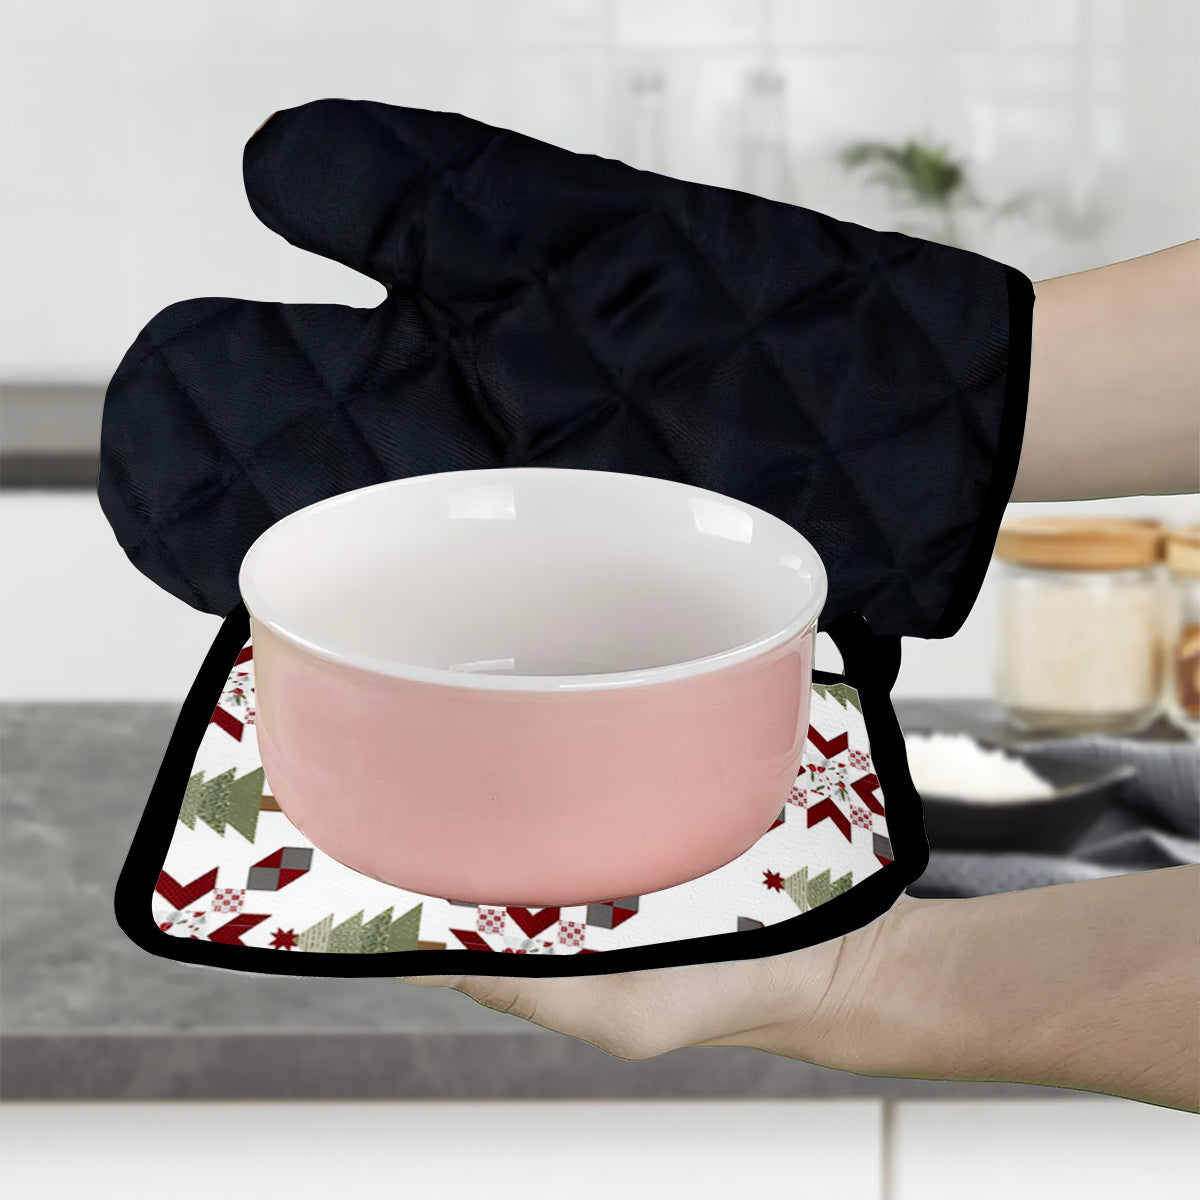 Christmas Calories Don't Count - Personalized Baking Oven Mitts